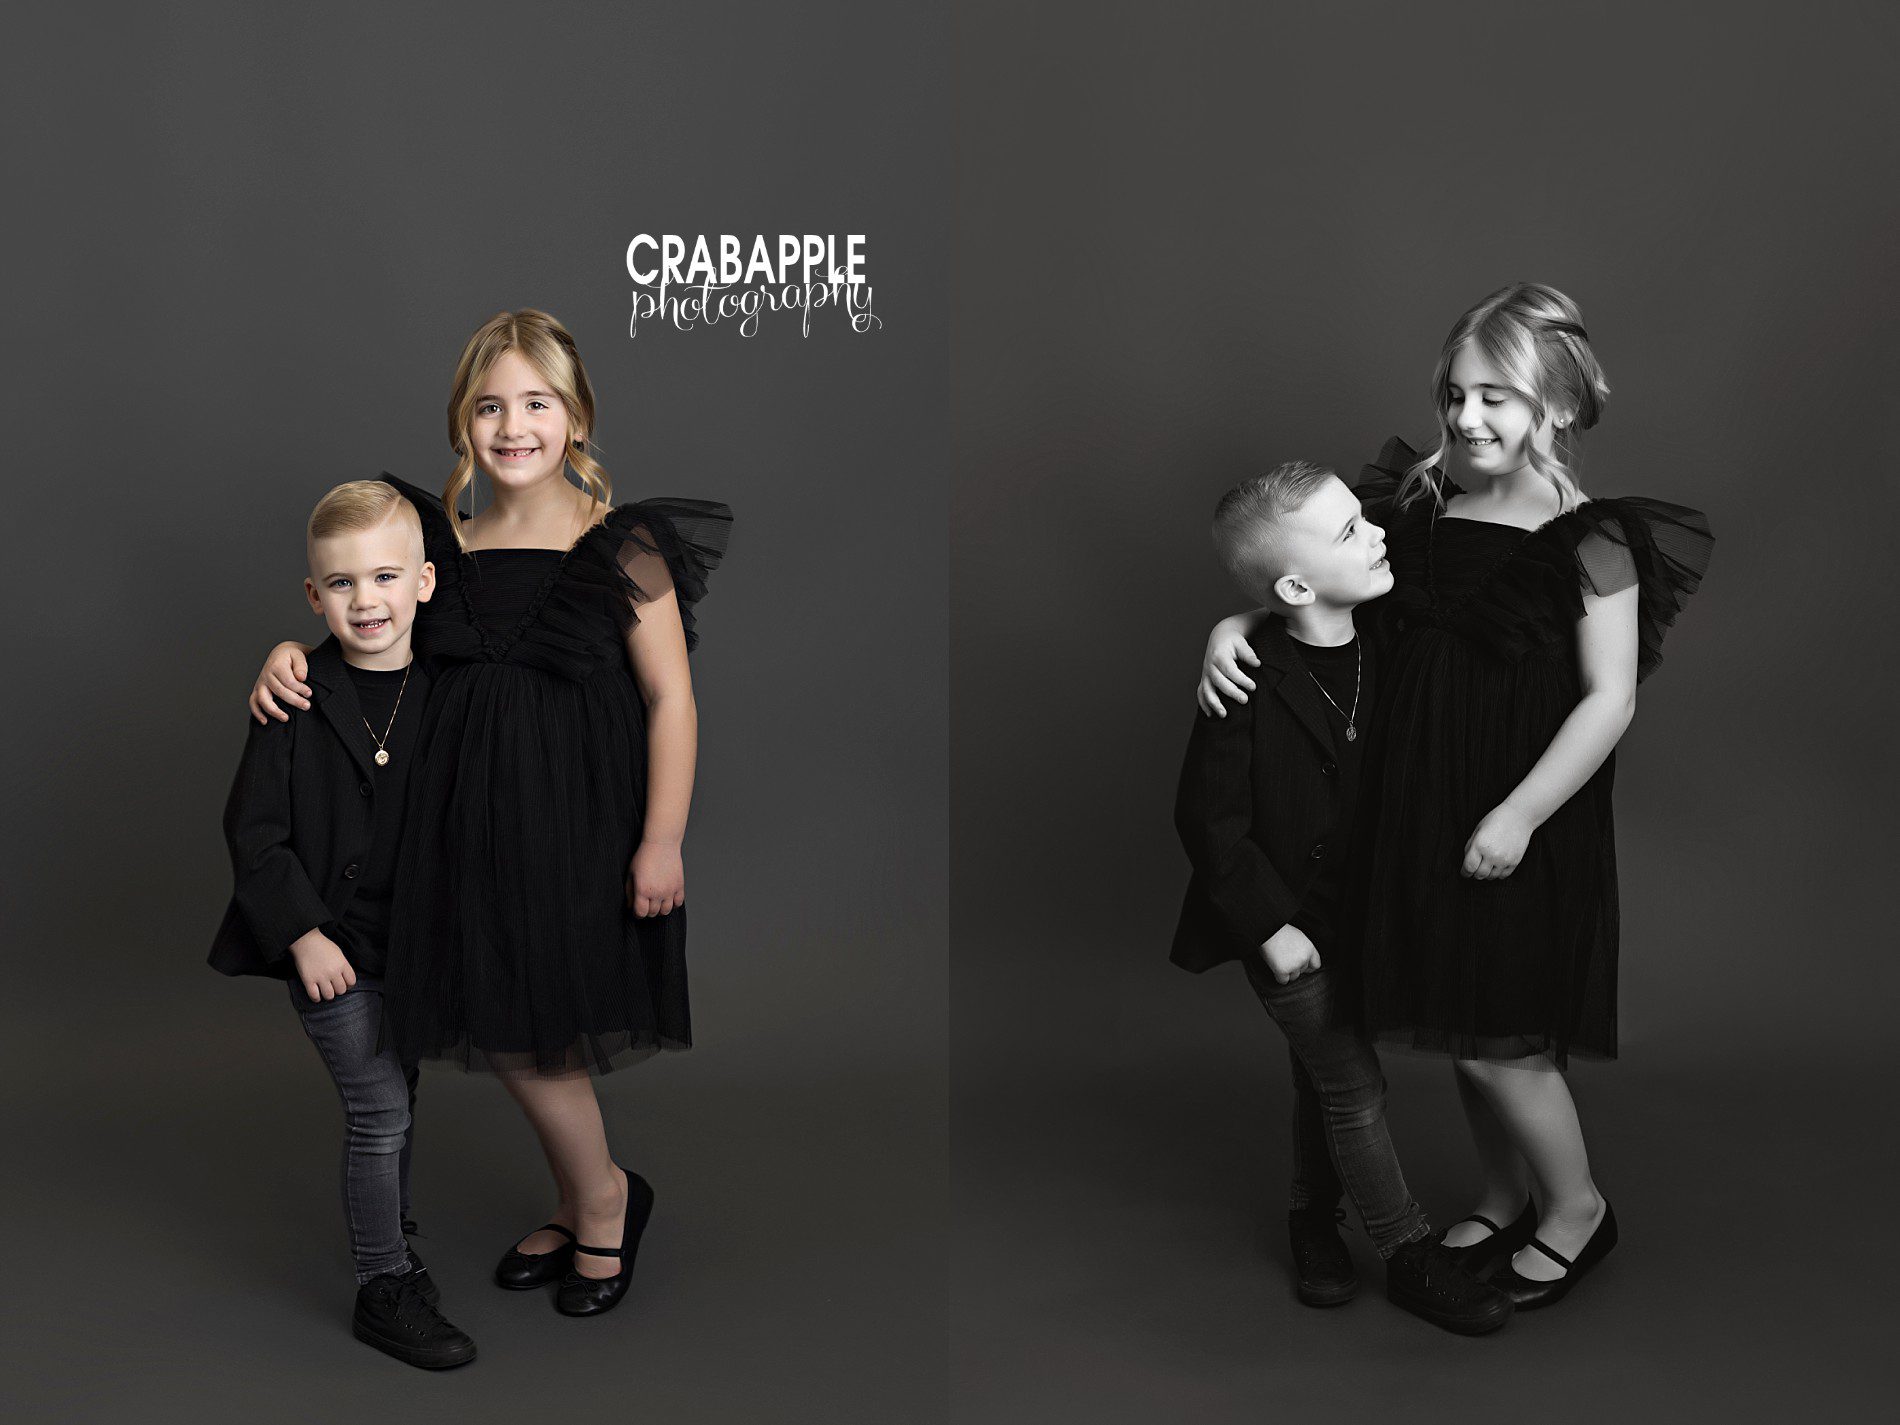 brother and sister photos